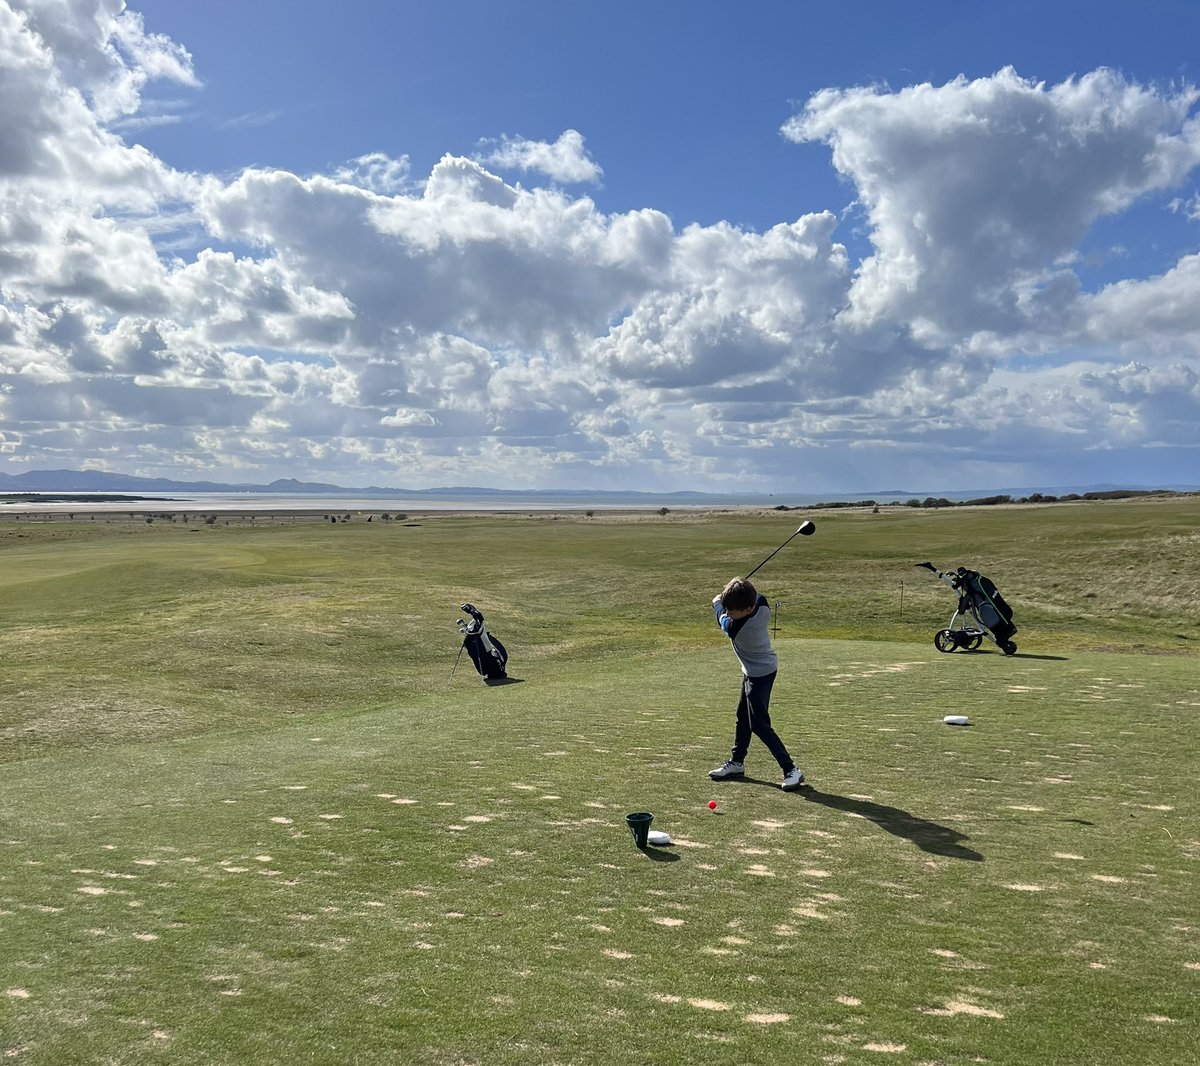 Great afternoon with Henry @GullaneGolfClub Thanks to the hospitality of @GullaneProShop for making us welcome. Henry enjoyed the test of golf on @scotgolfcoast #golf #Edinburgh